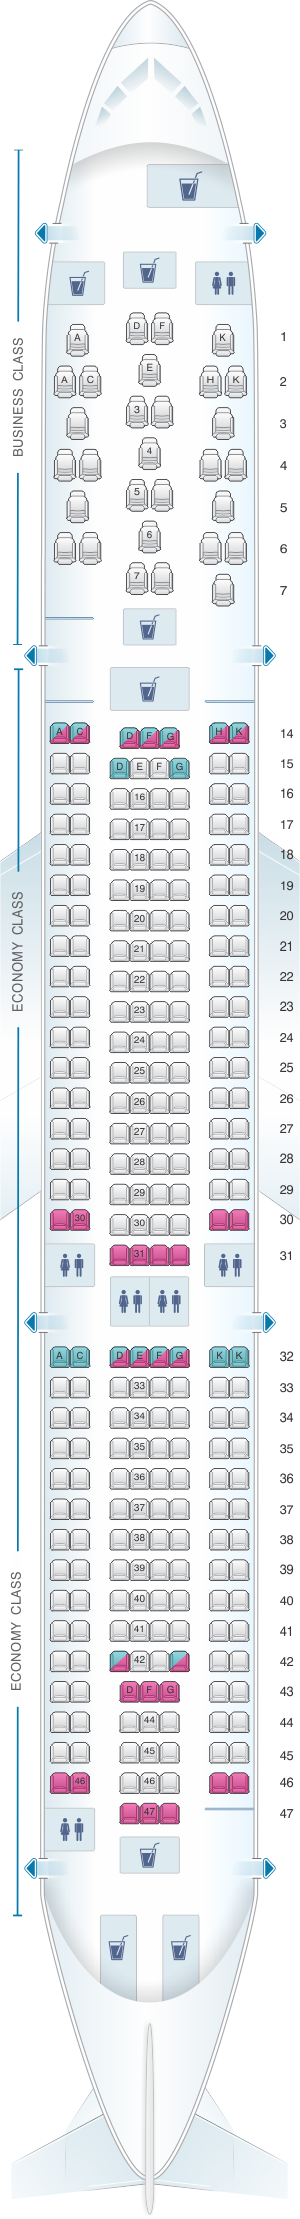 Seat map for Brussels Airlines Airbus A330 300